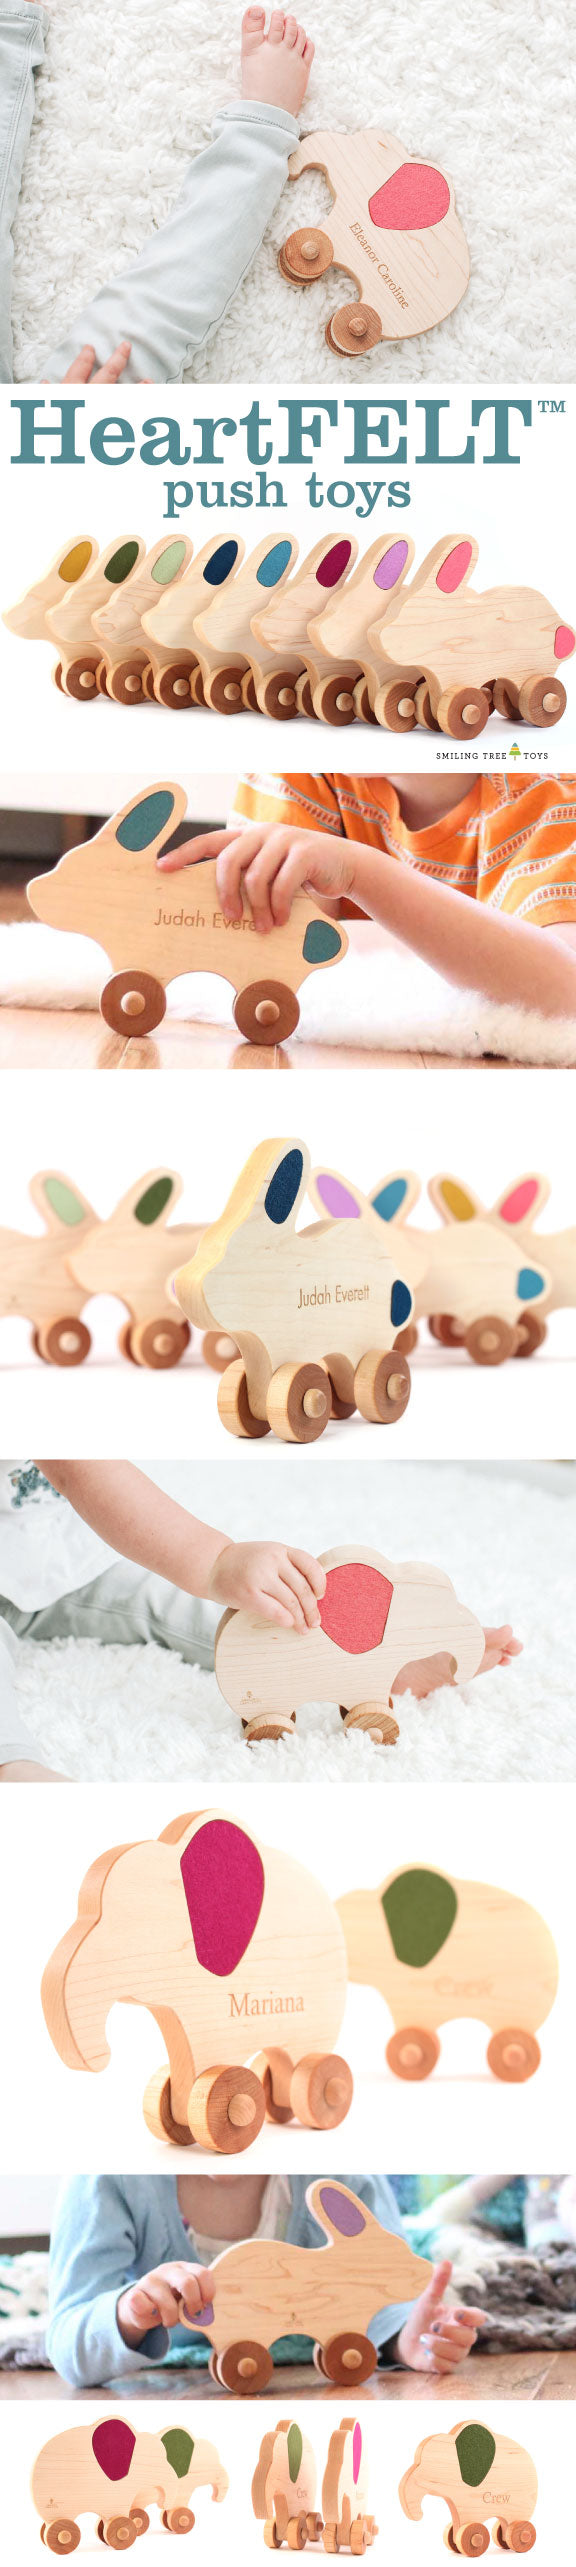 HeartFELT Push Toys handmade wooden toys for babies and toddlers